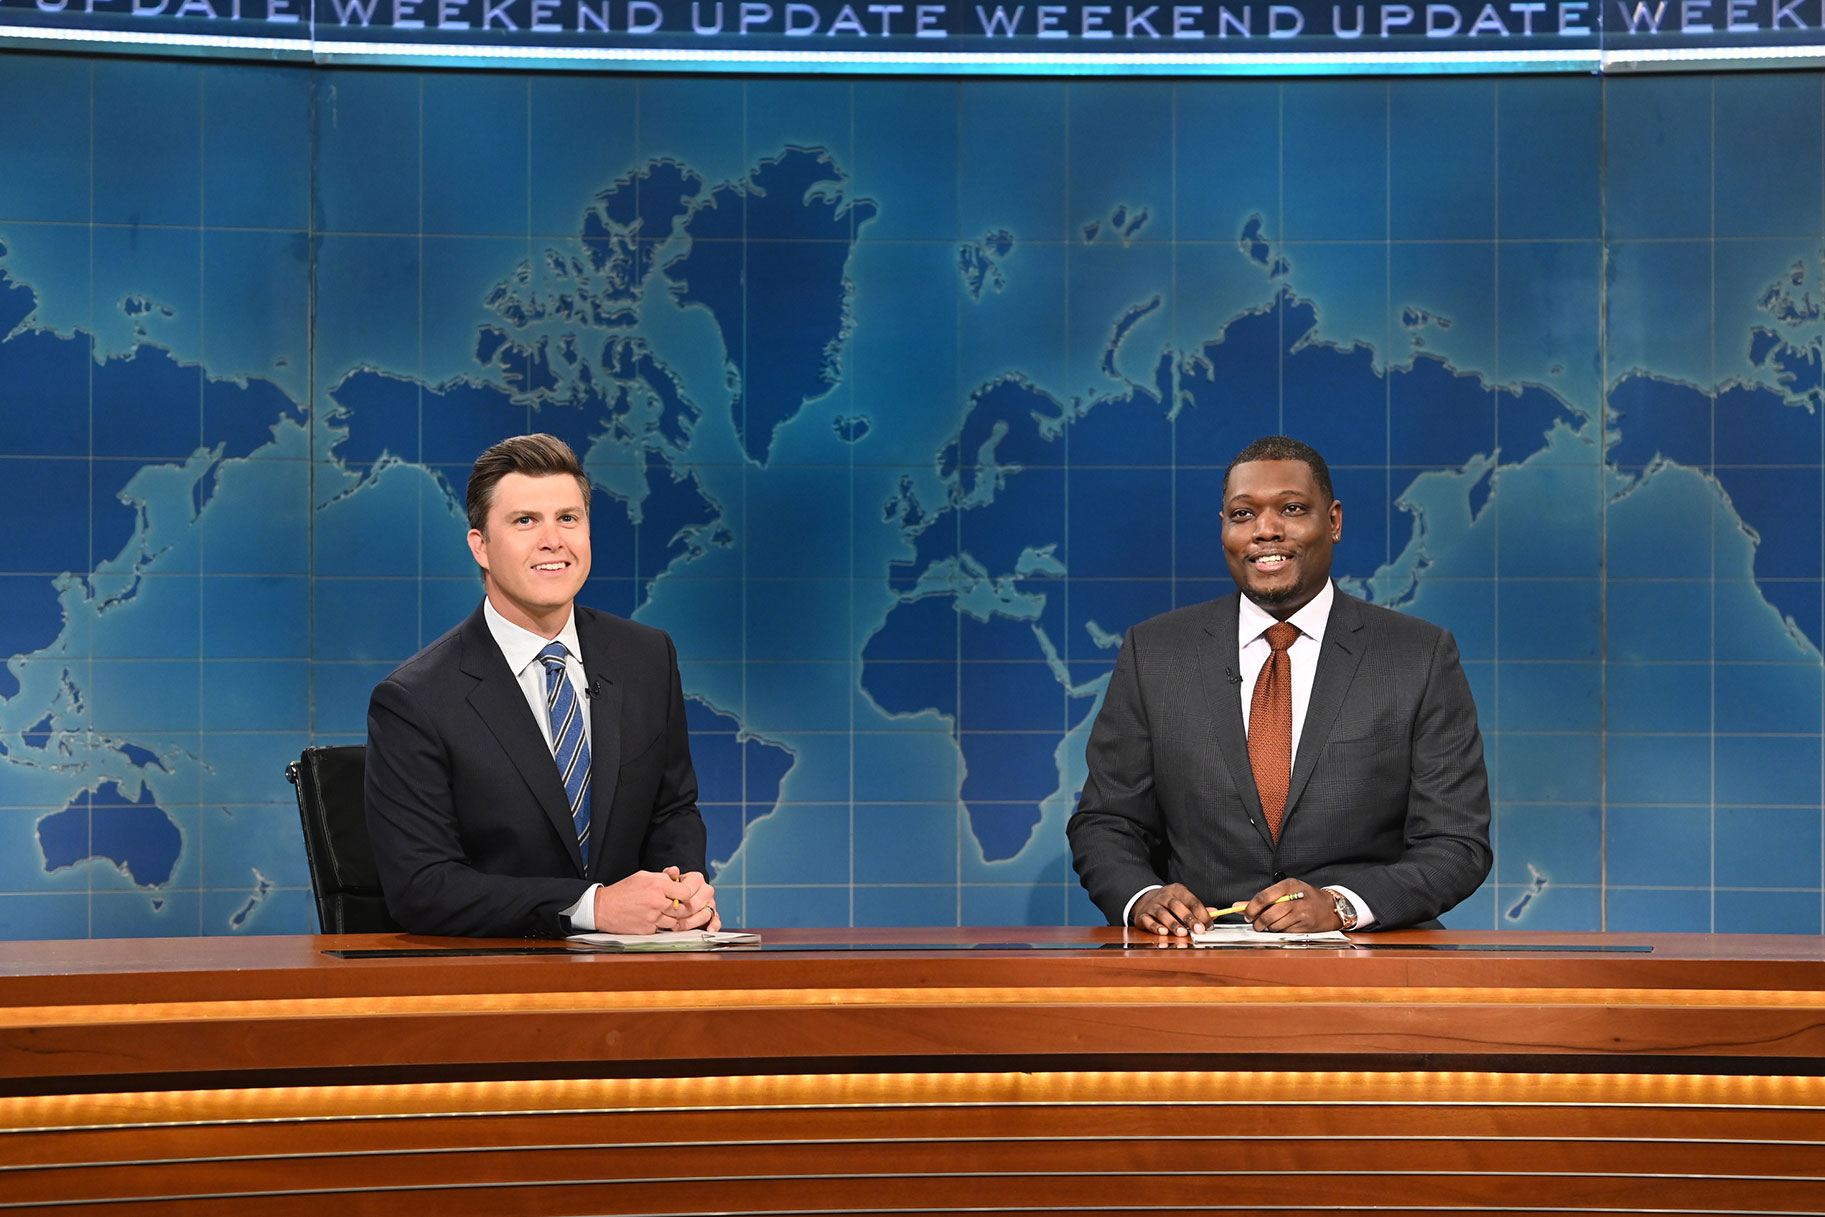 Colin Jost and Michael Che sitting at the 'Weekend Update' desk